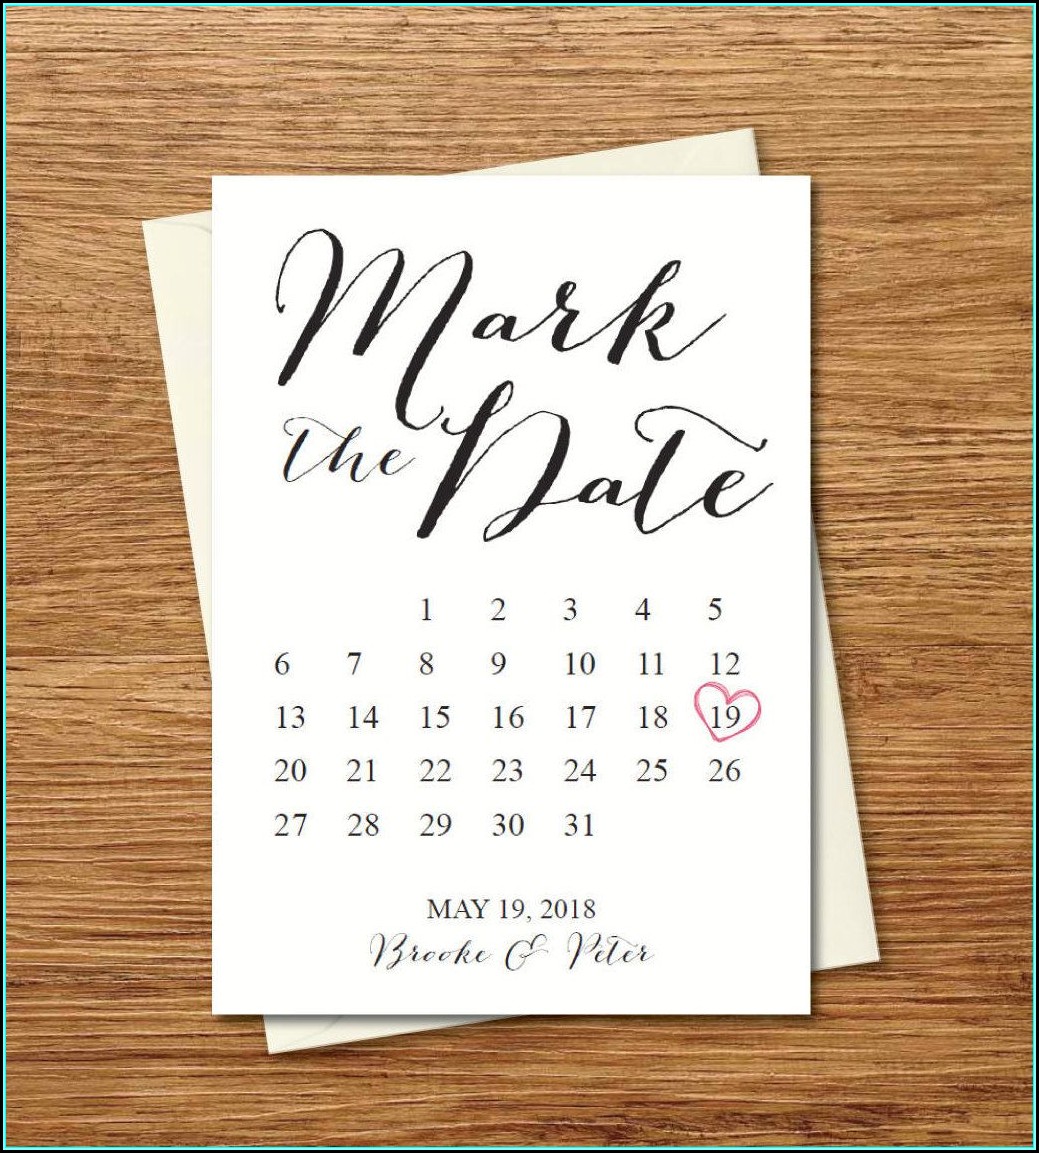 Free Printable Rustic Save The Date Templates